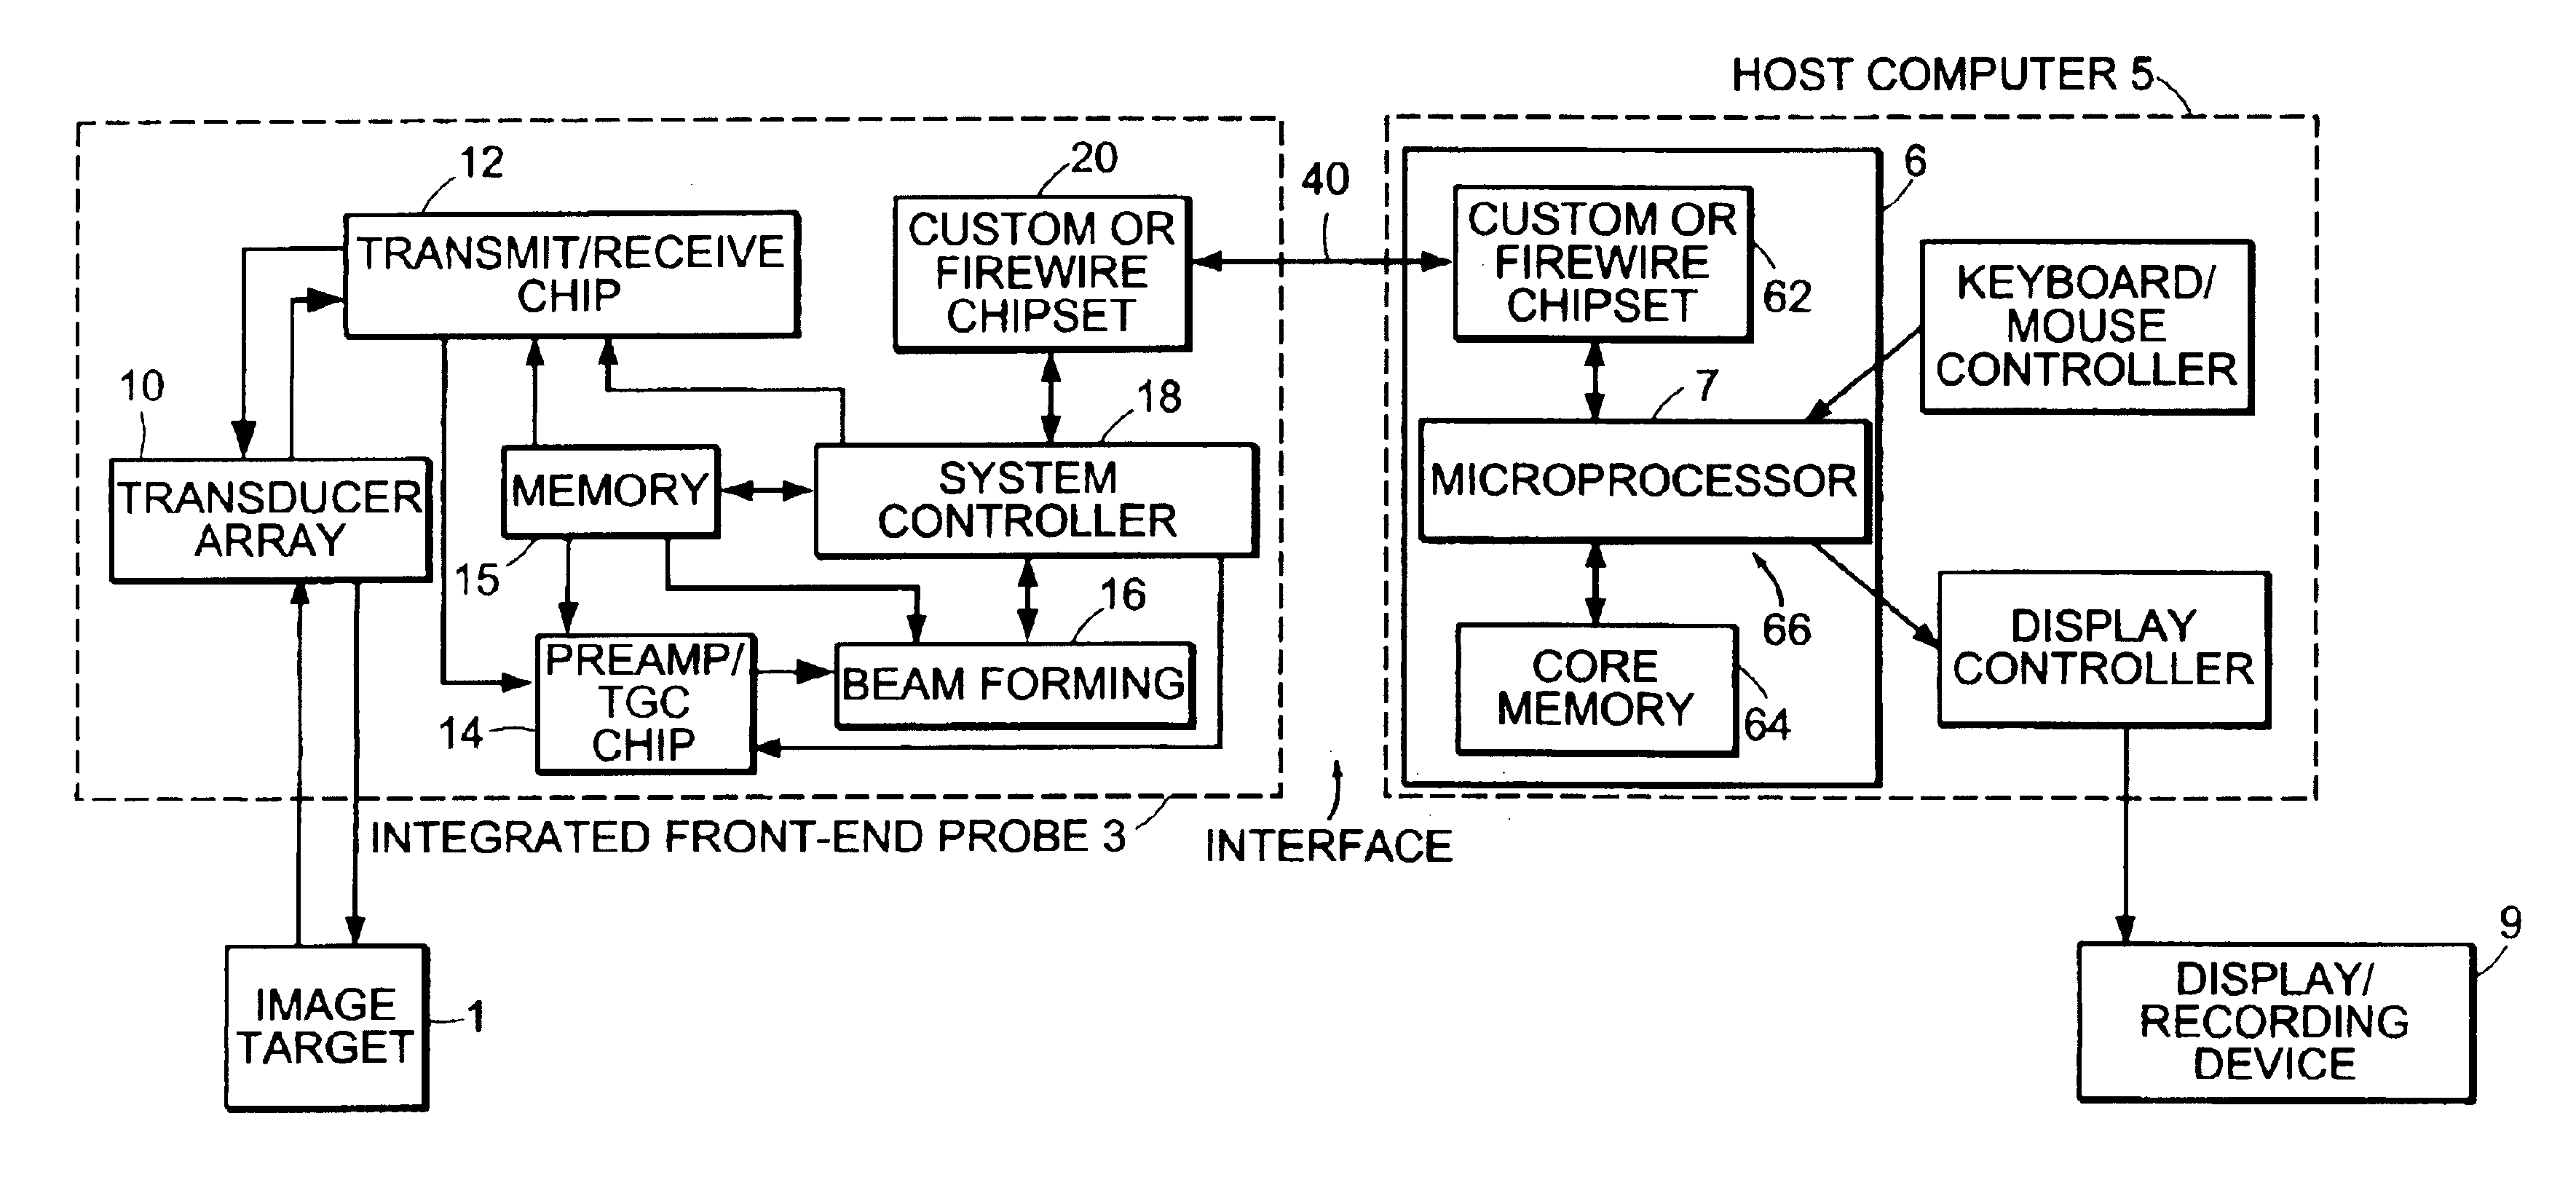 Ultrasound probe with integrated electronics